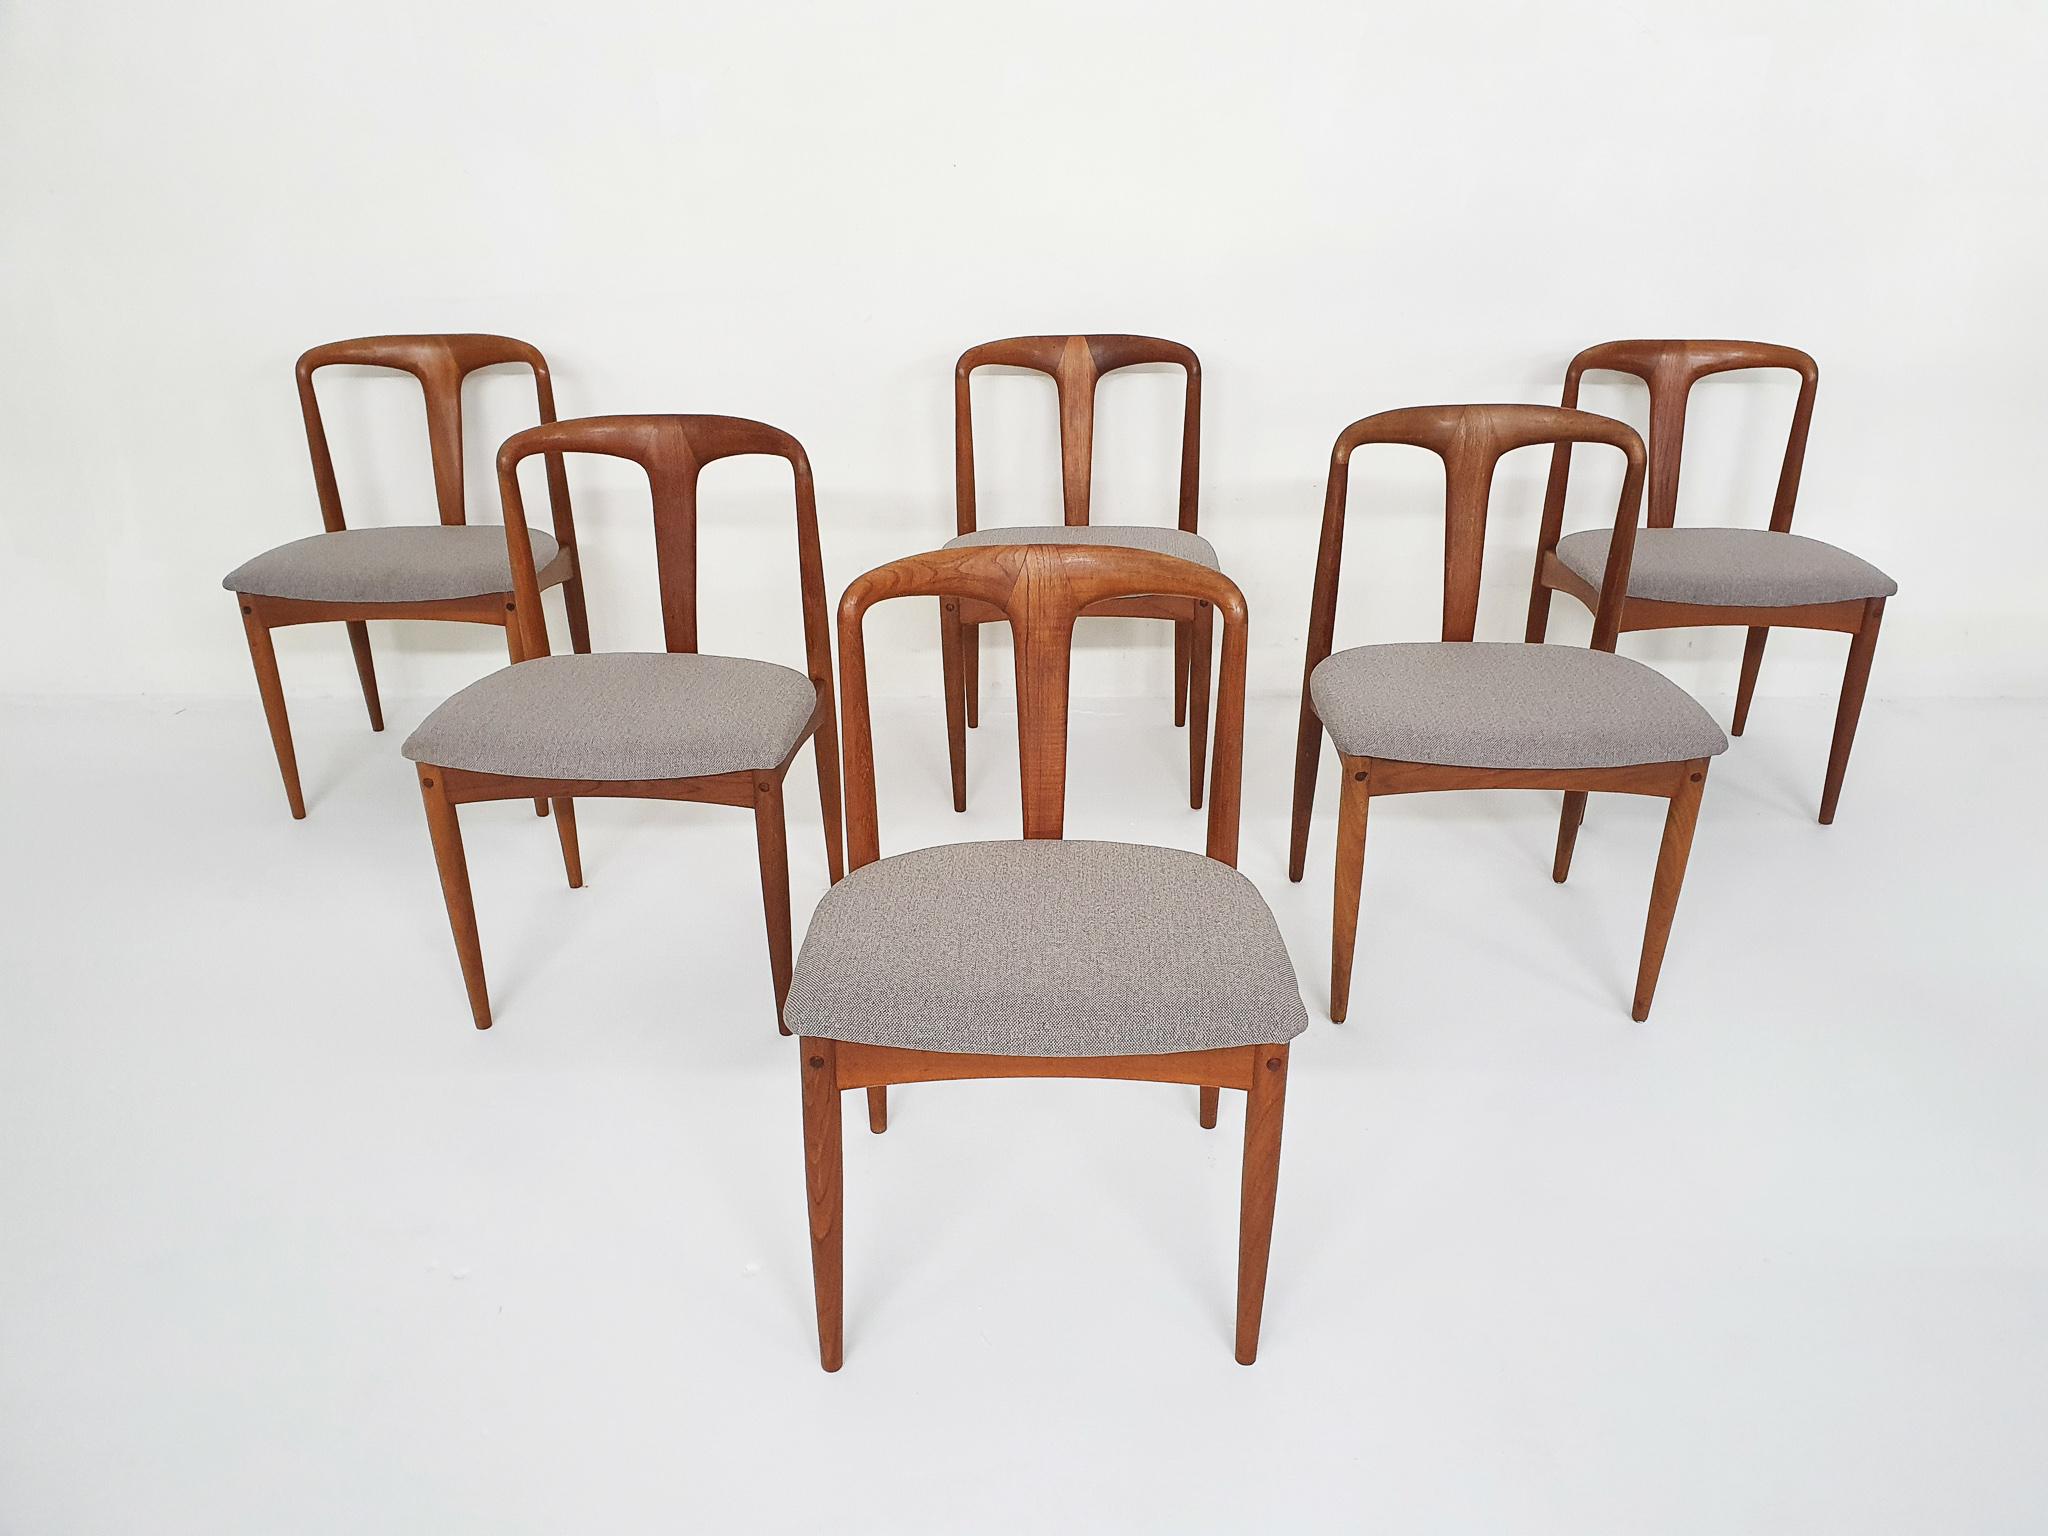 Set of six Danish design dining chairs made of teak and designed by Johannes Andersen. The chairs are produced by Uldum Möbelfabrik in Denmark in the 1950s. T
Pure craftsmanship as only the Danish could in the midcentury. The chair has a solid teak